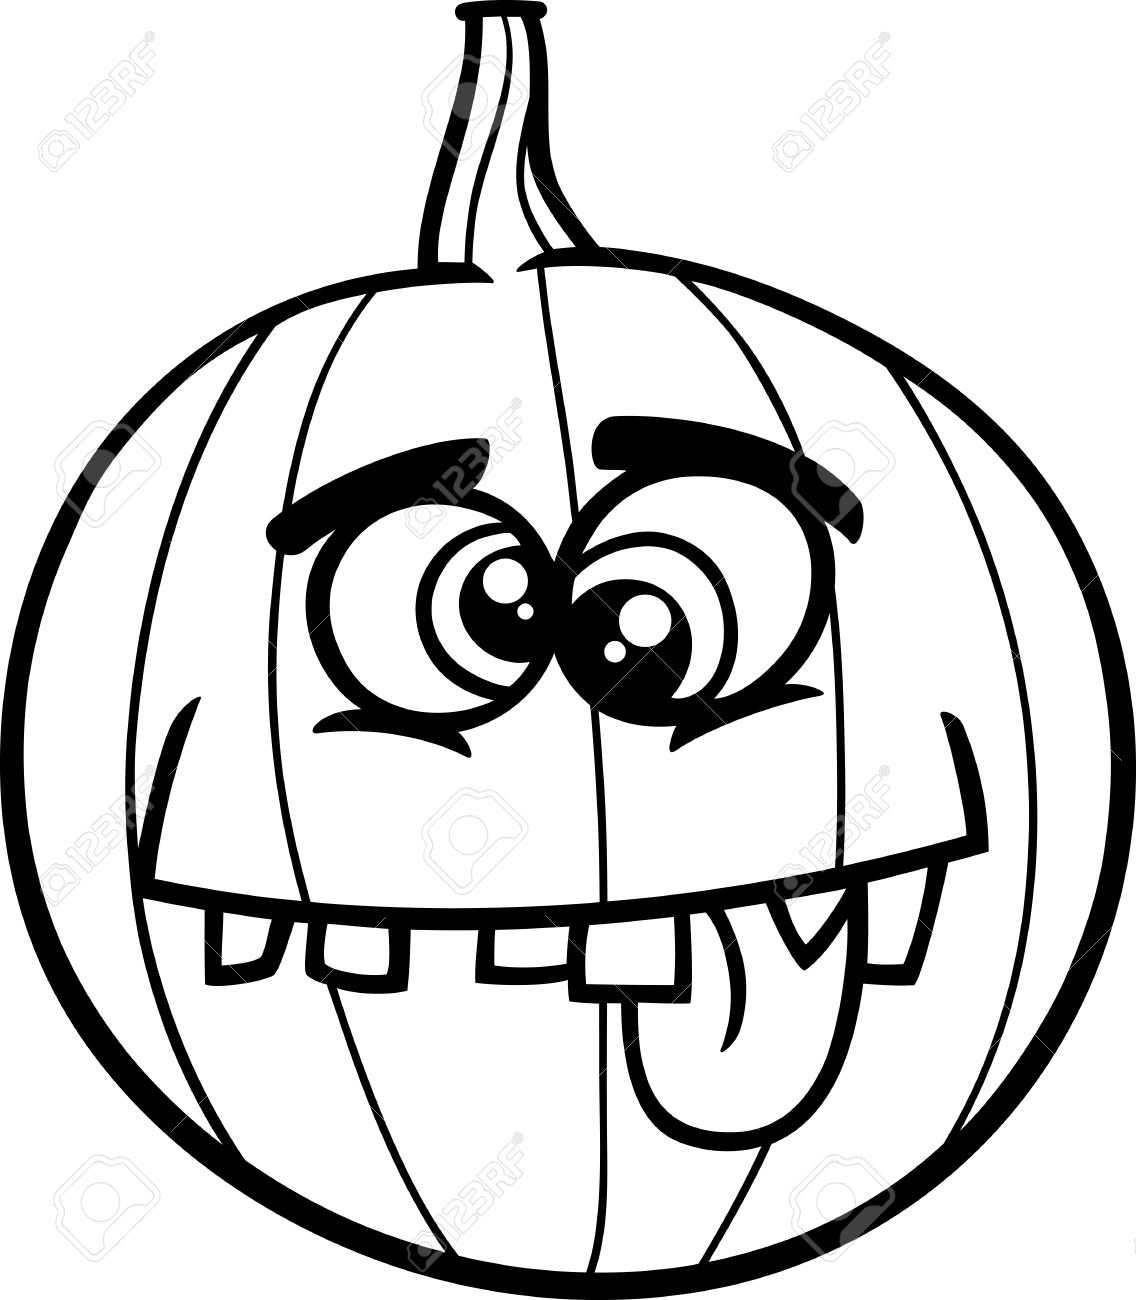 Black and white cartoon illustration of funny jack lantern pumpkin coloring page royalty free svg cliparts vectors and stock illustration image